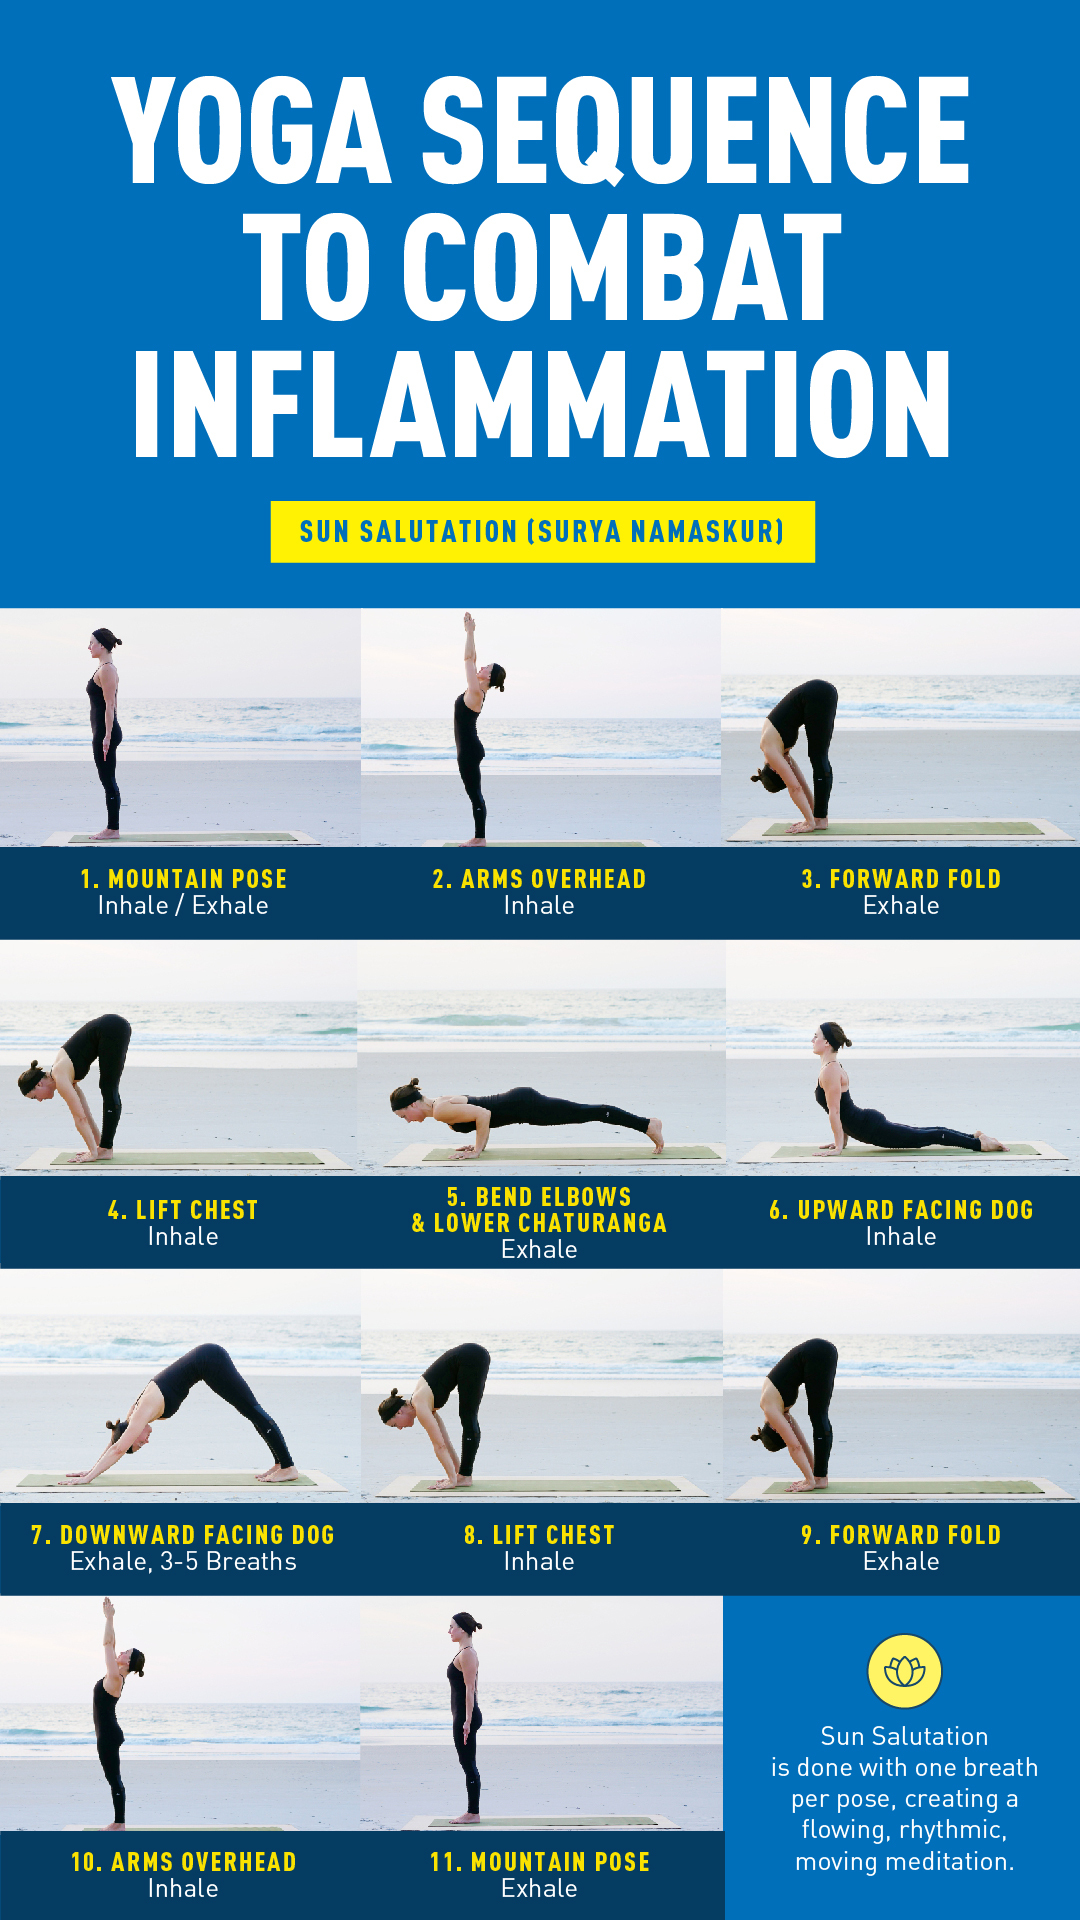 8 Yoga Positions Said to Relieve Gas - GoodRx